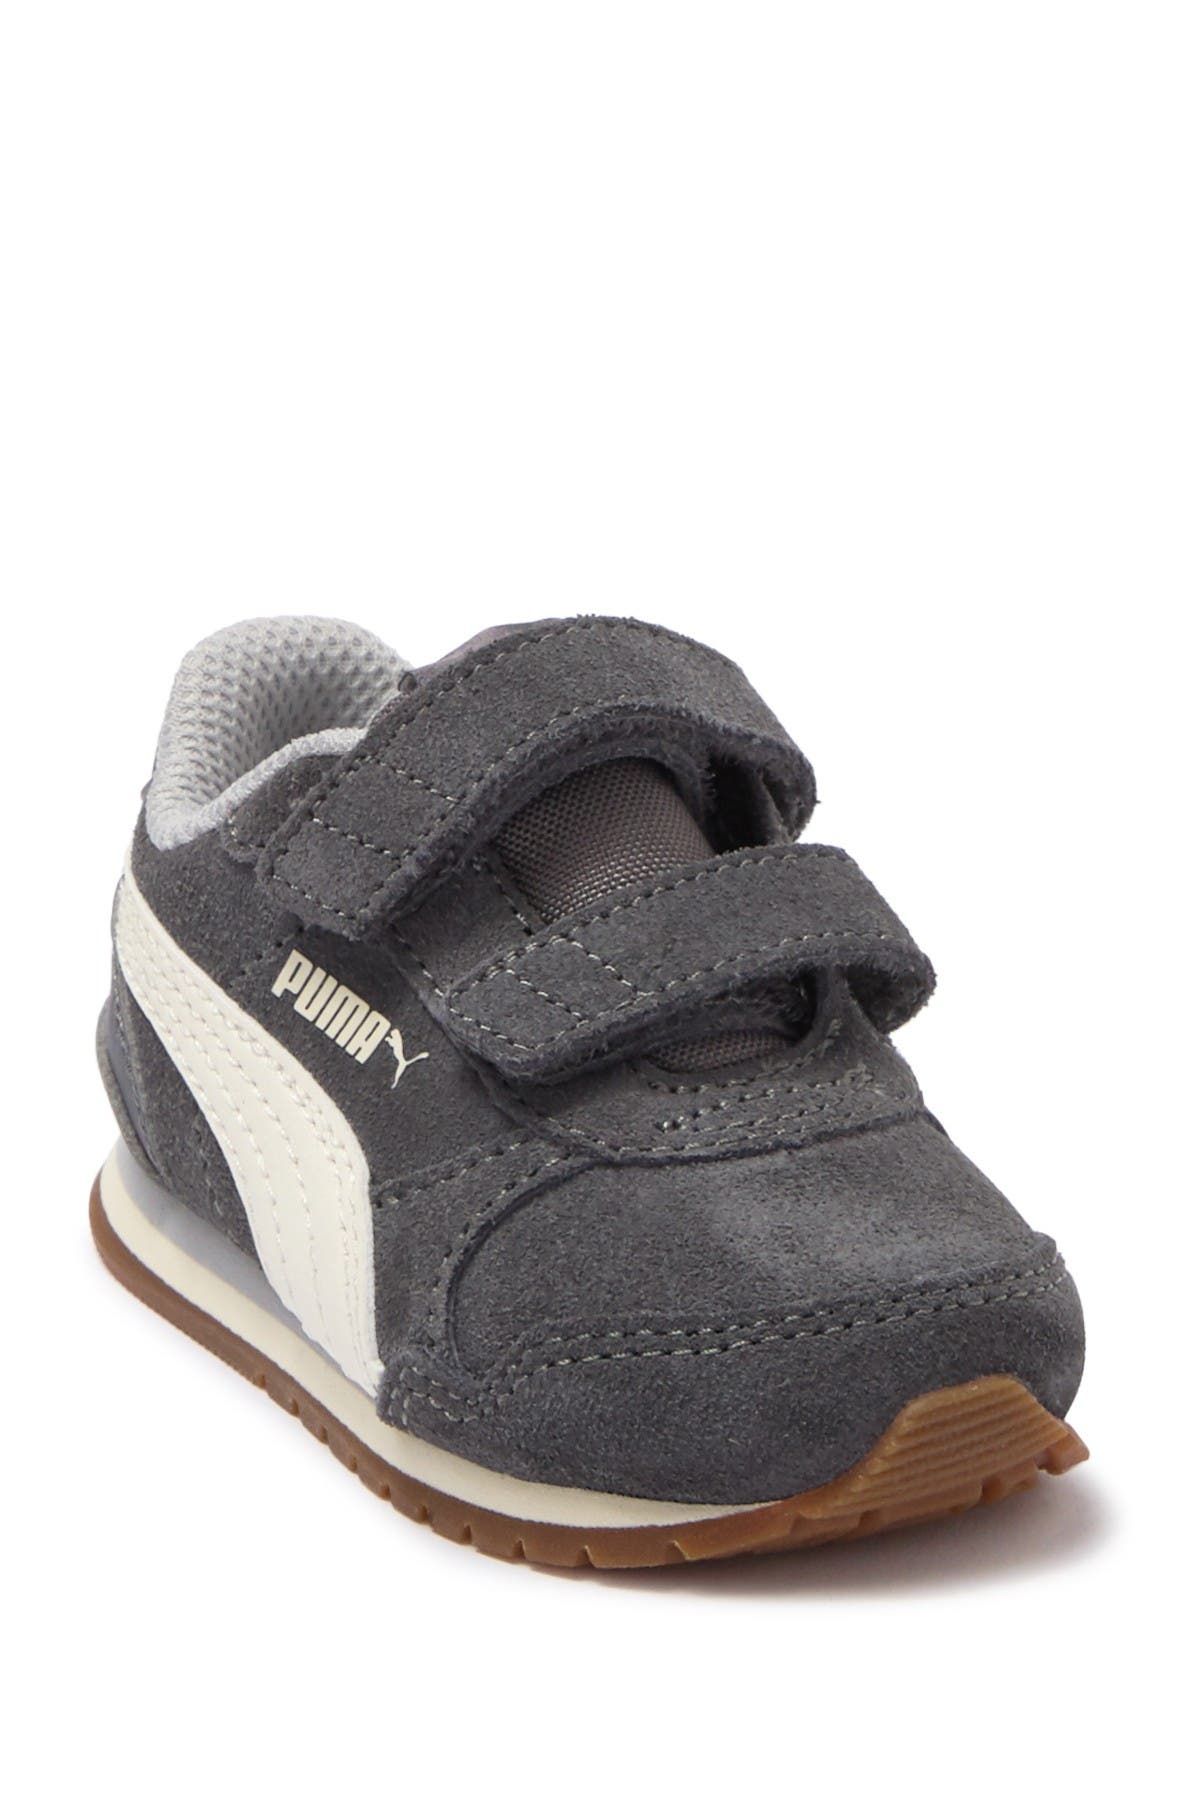 nordstrom boys shoes